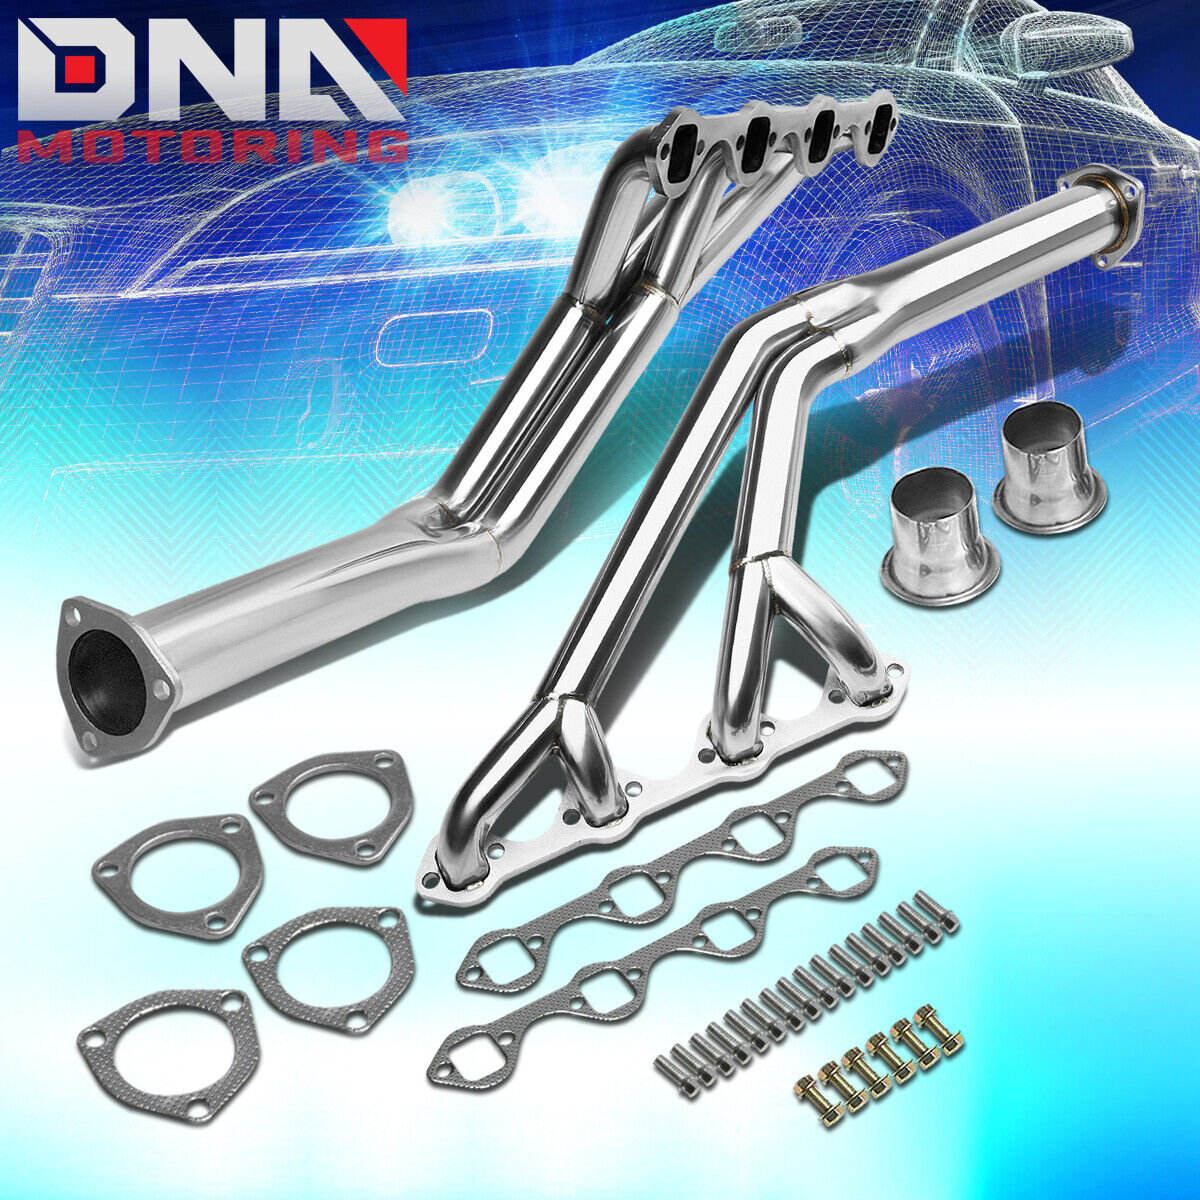 STAINLESS STEEL TRI-Y HEADER FOR 64-70 MUSTANG 260/289/302 V8 EXHAUST/MANIFOLD